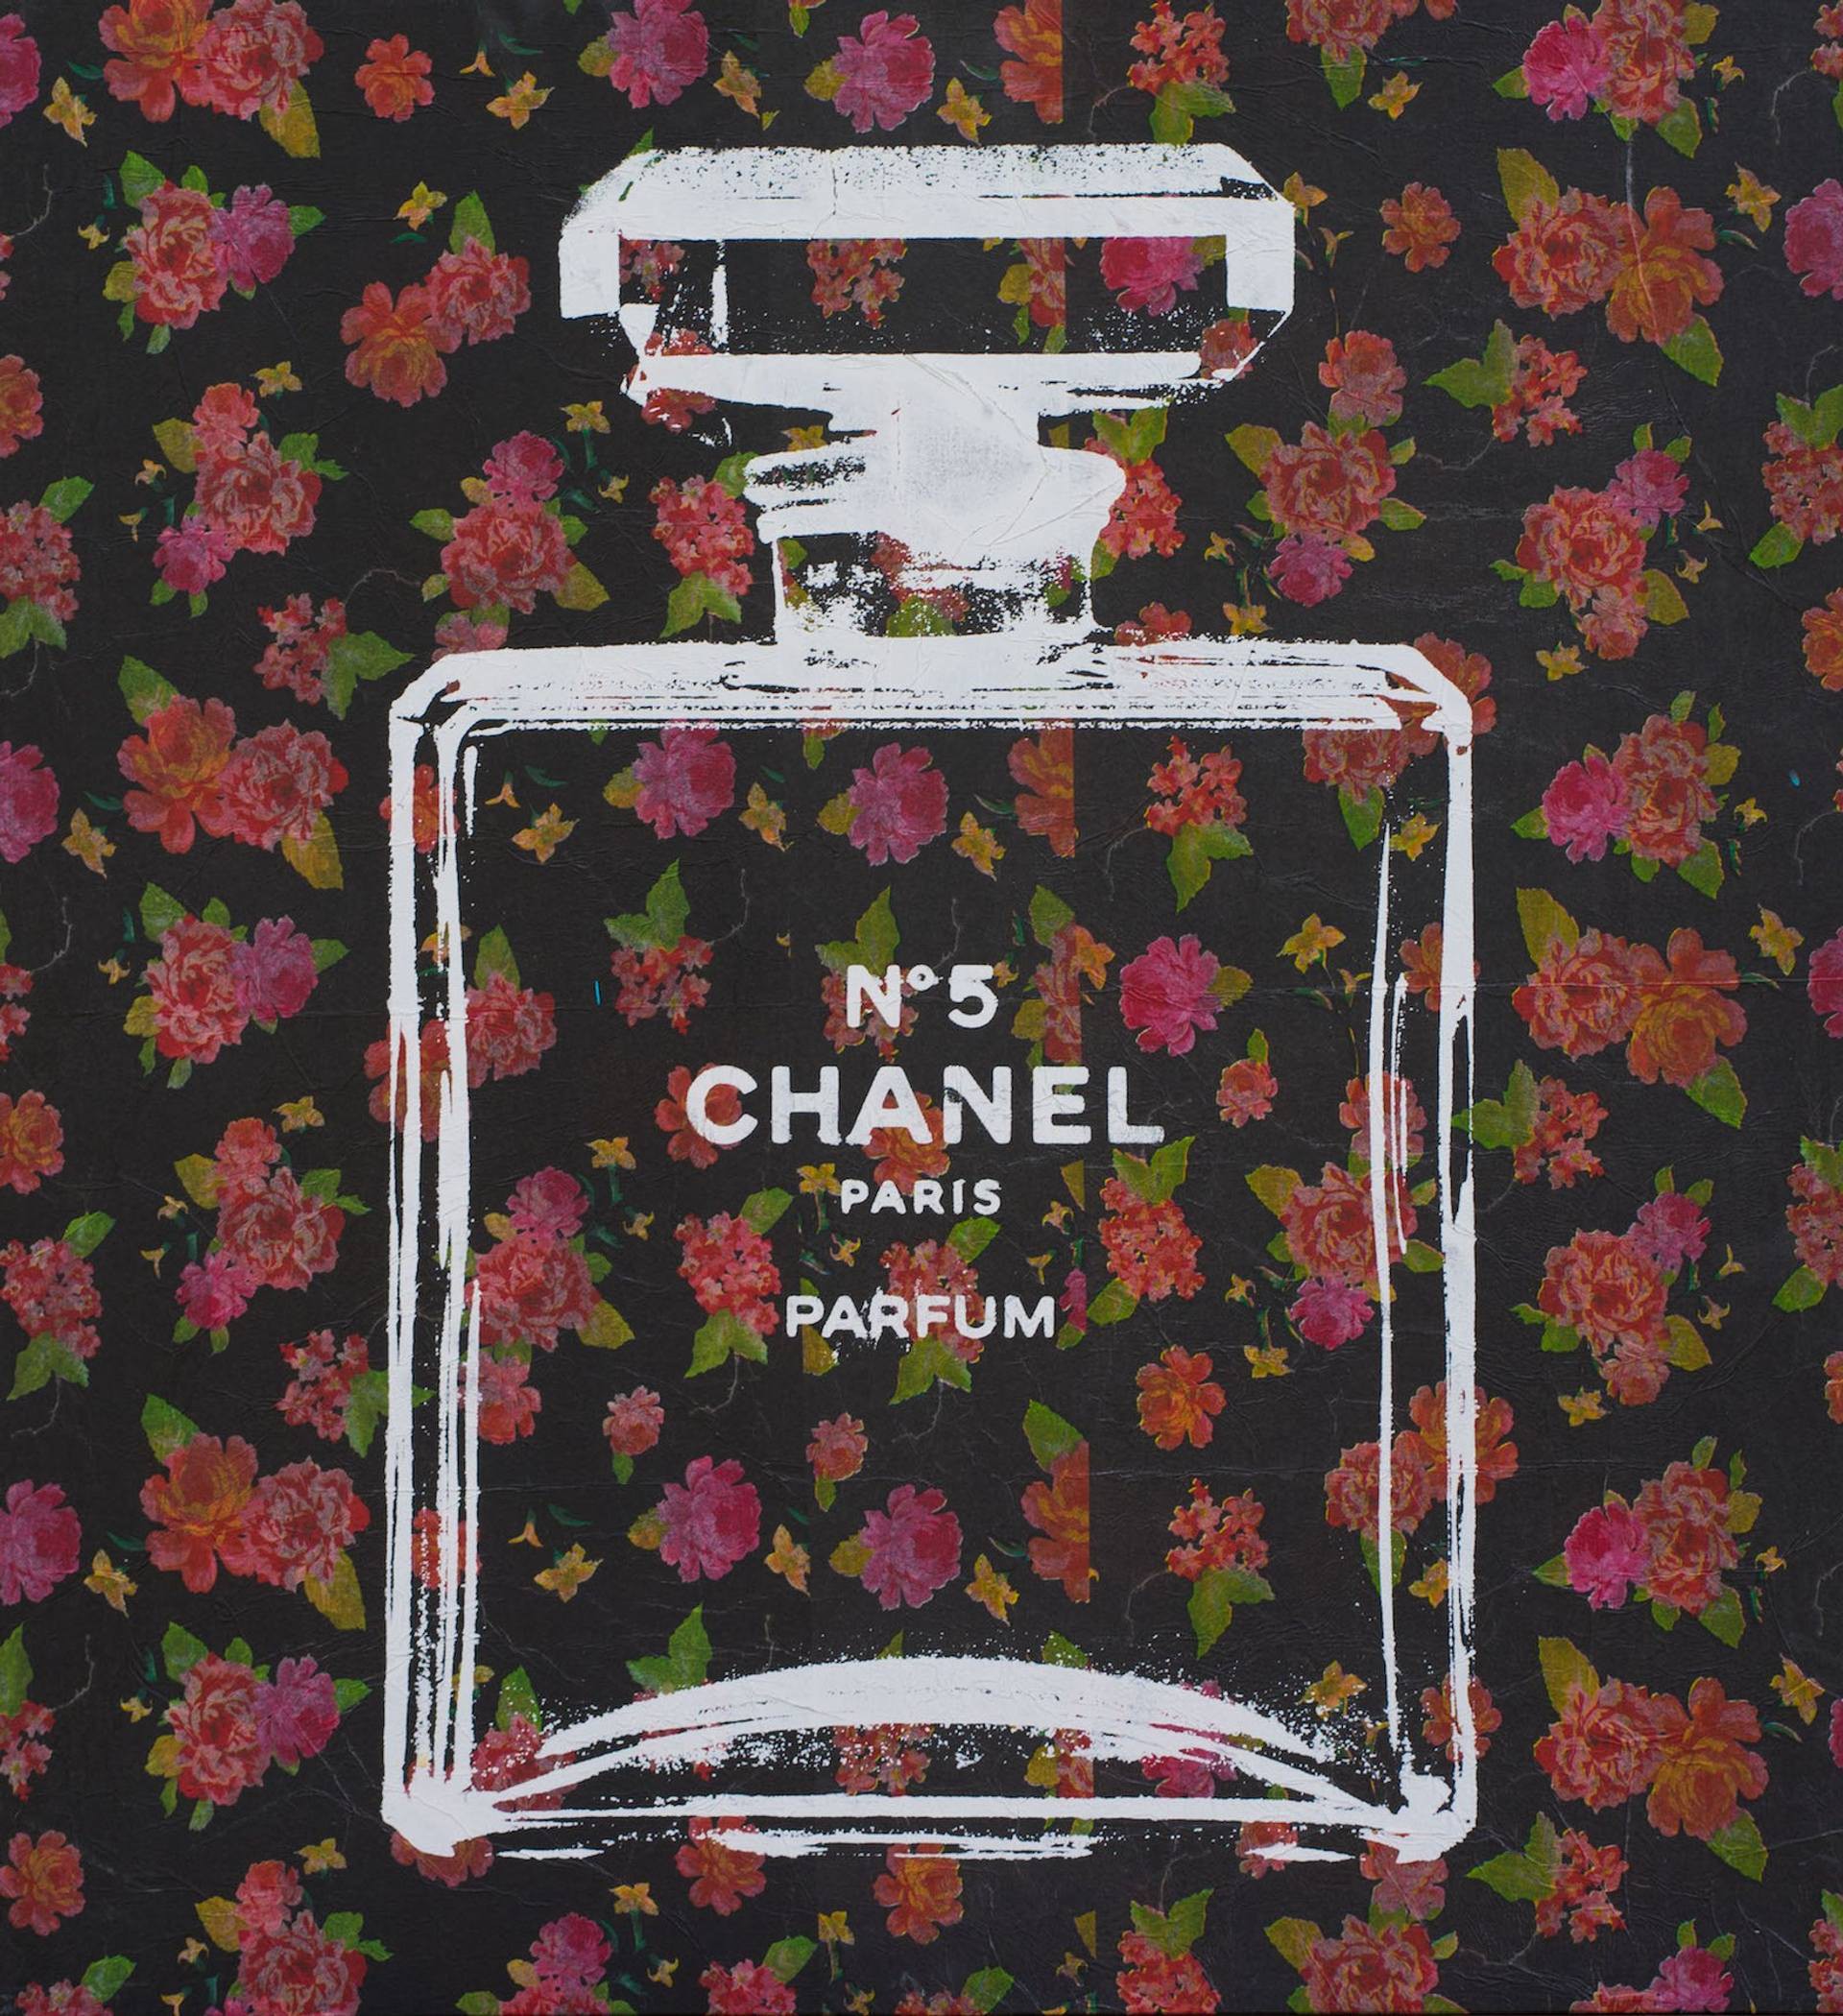 ▷ Chanel No.5 by Dane Shue, 2021, Painting